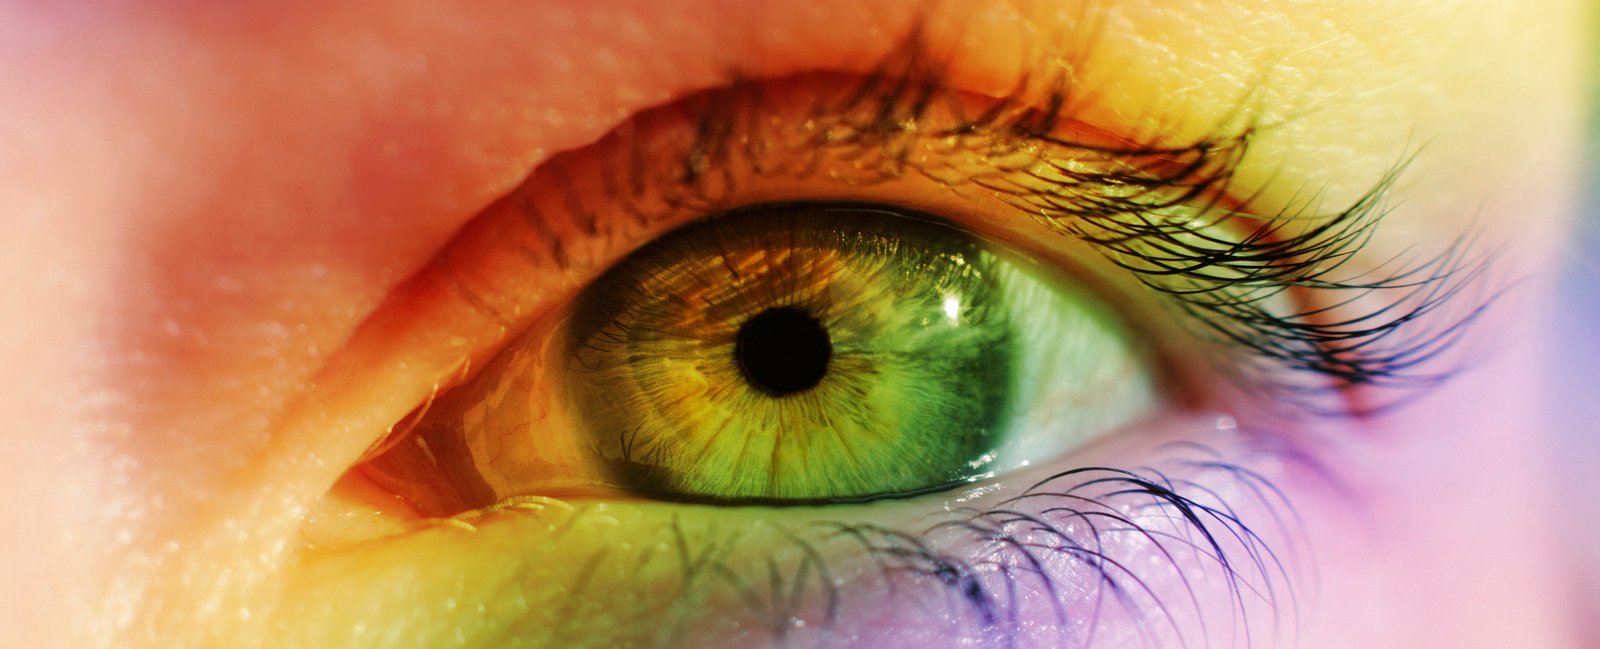 Just One Molecule Allows Us to See Millions More Colors Than Our Pets : ScienceAlert